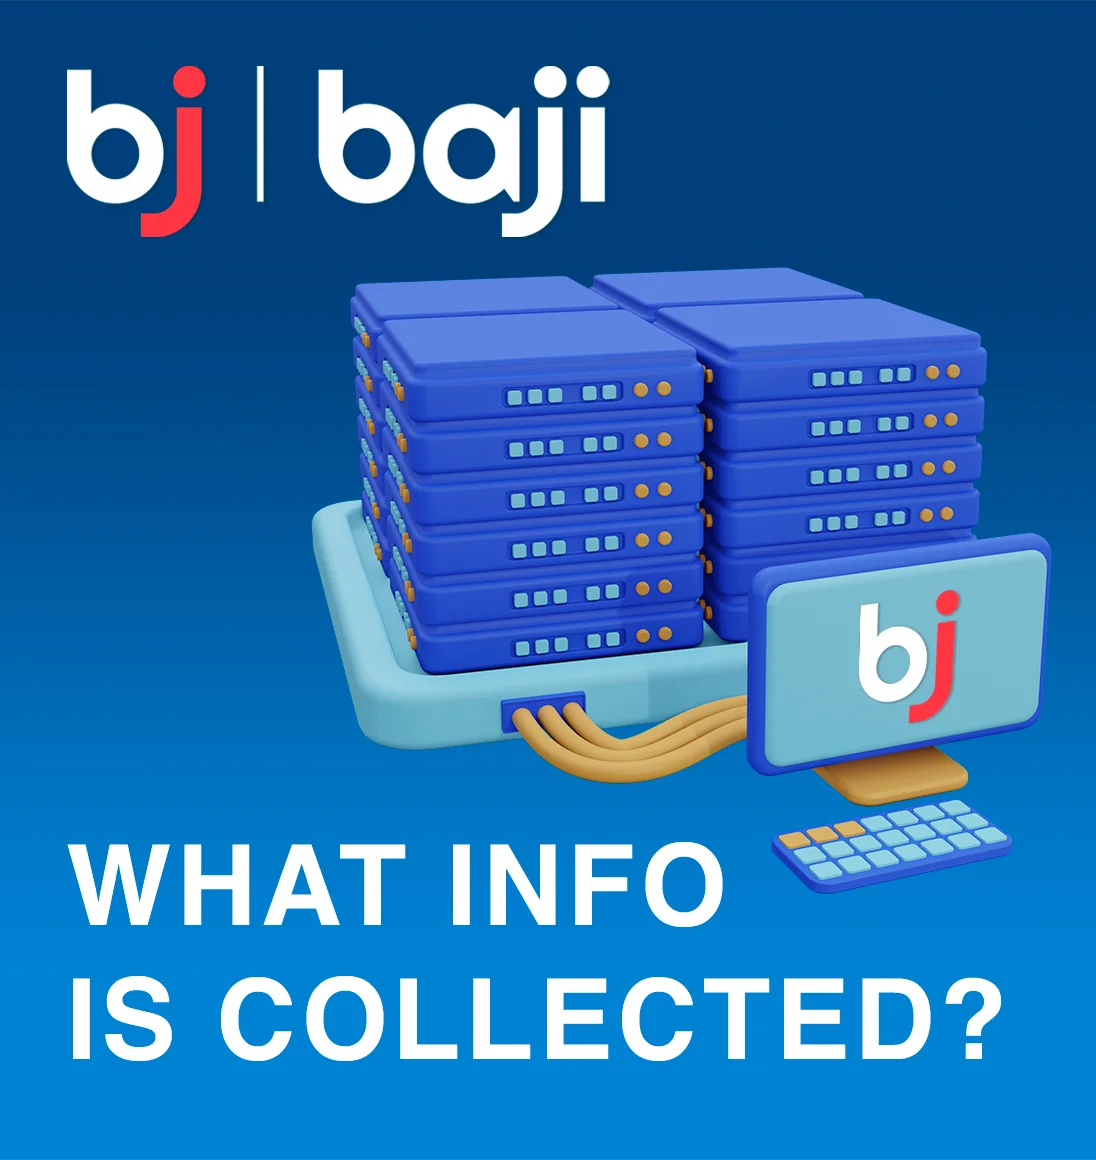 What Information is collecting using Baji Casino